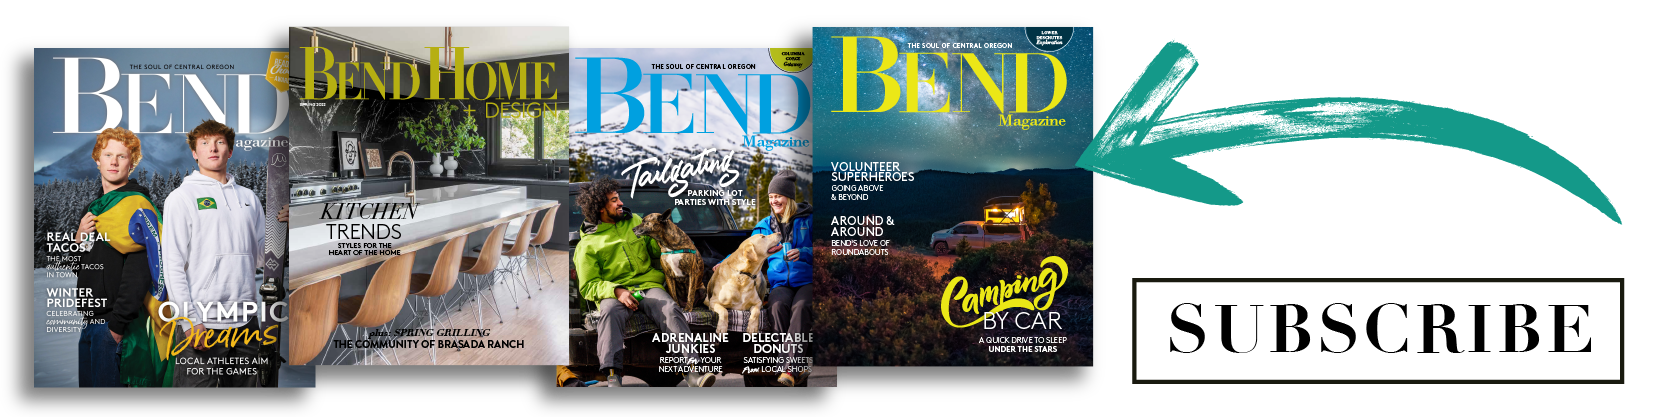 Subscribe to Bend Magazine